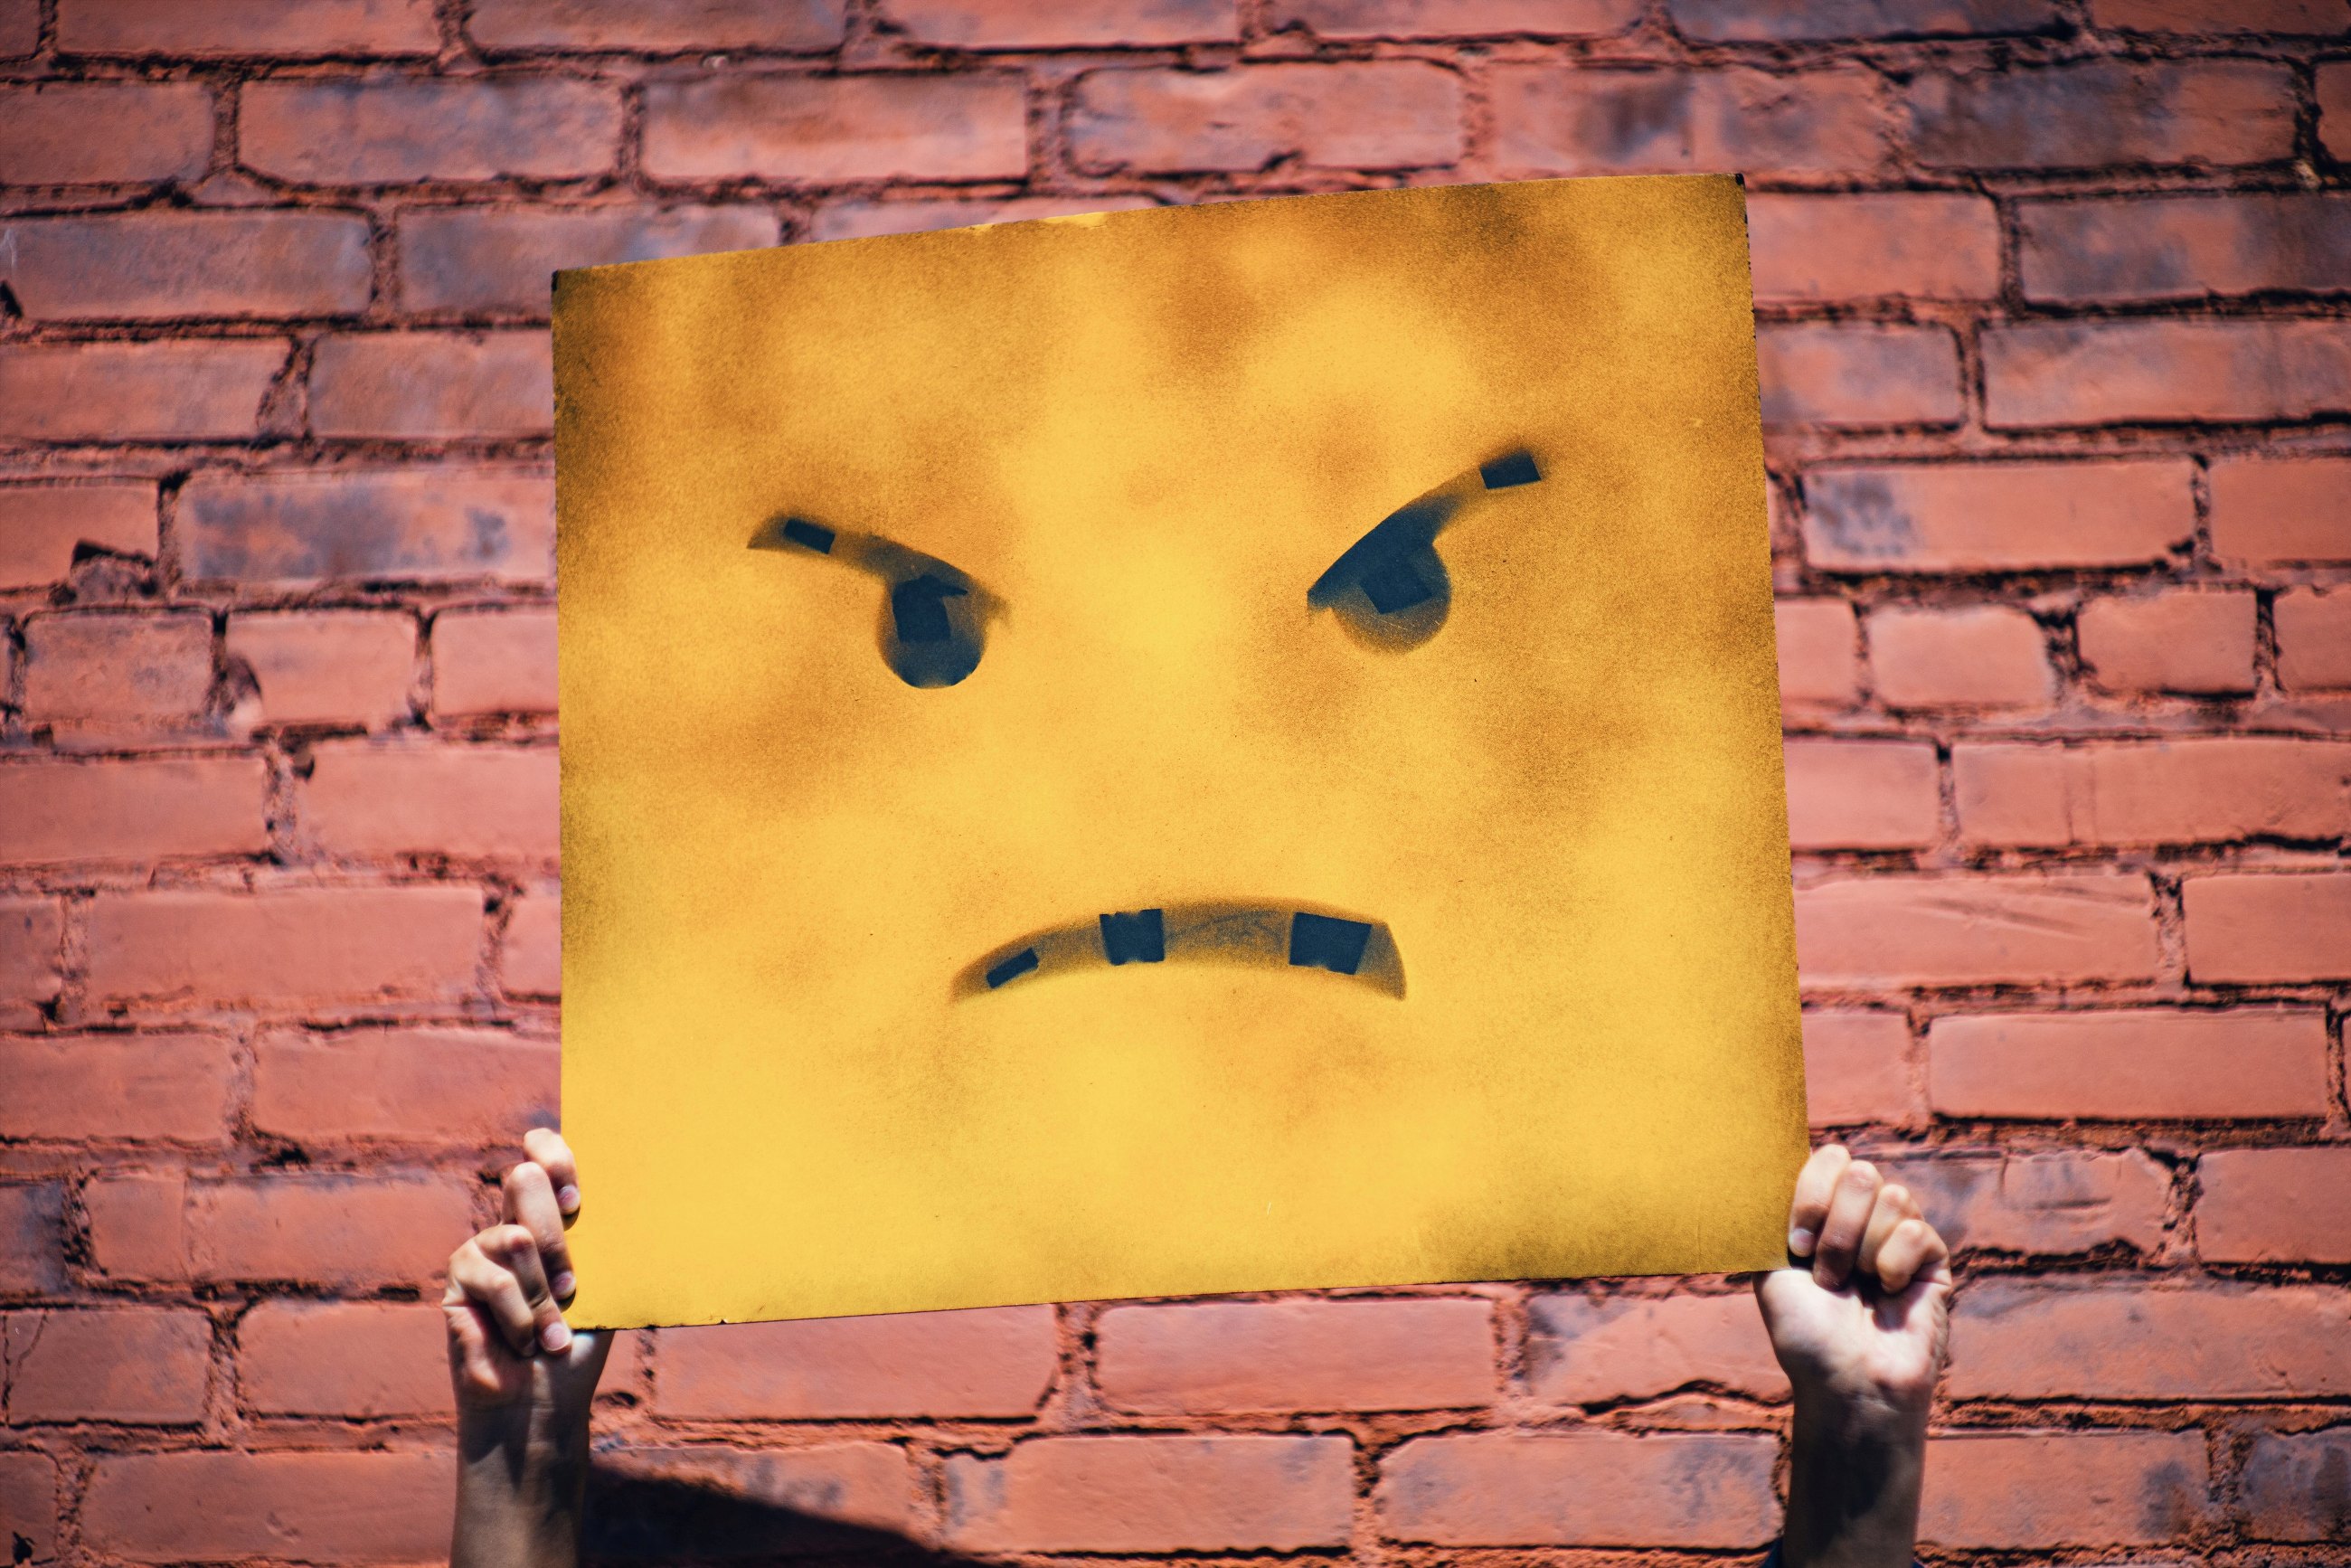 Dealing with Anger: Does Getting Angry Make Me a Bad Person?